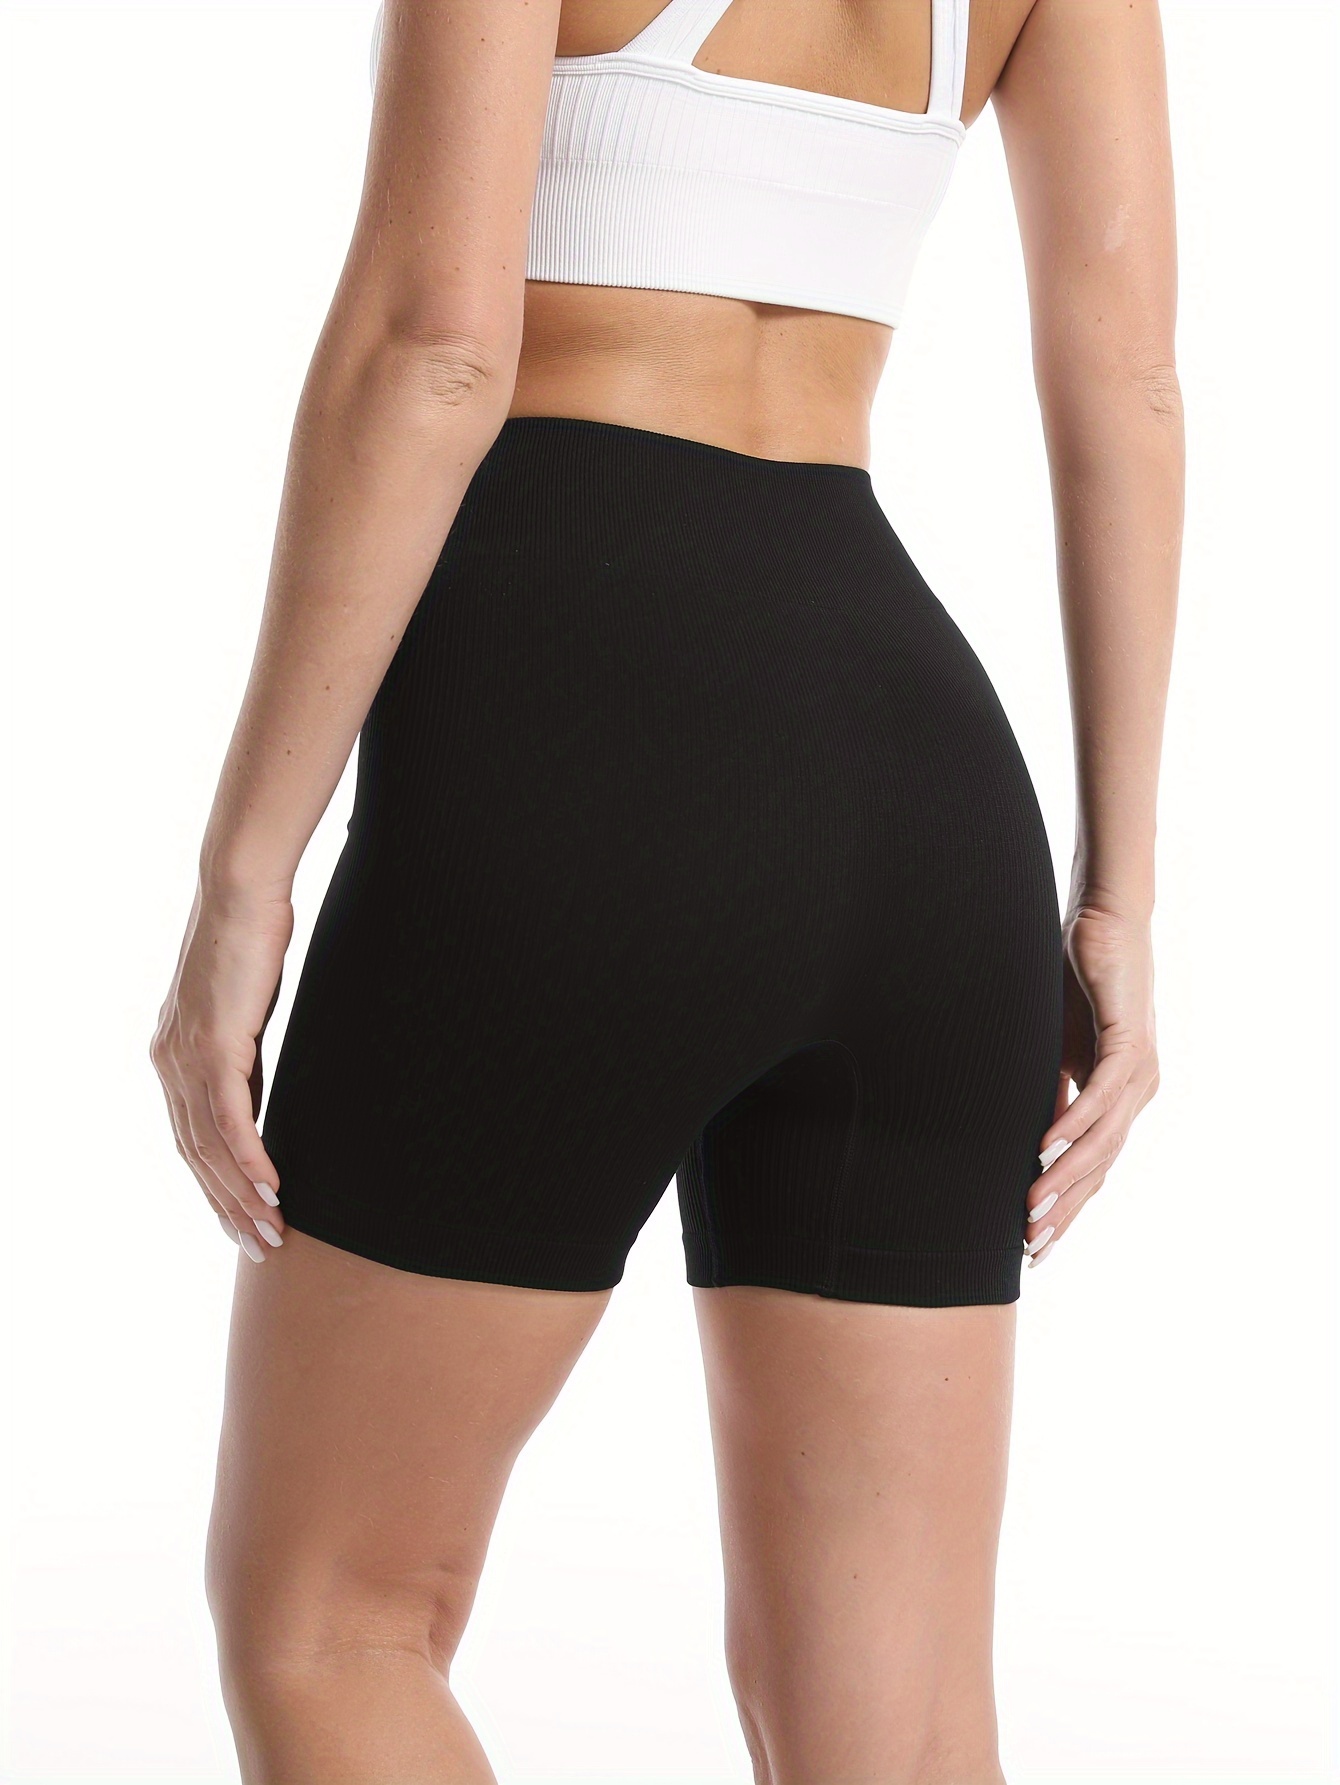 Booty Shorts for Women Scrunch Butt Lifting High Waisted Yoga Shorts  Workout Gym